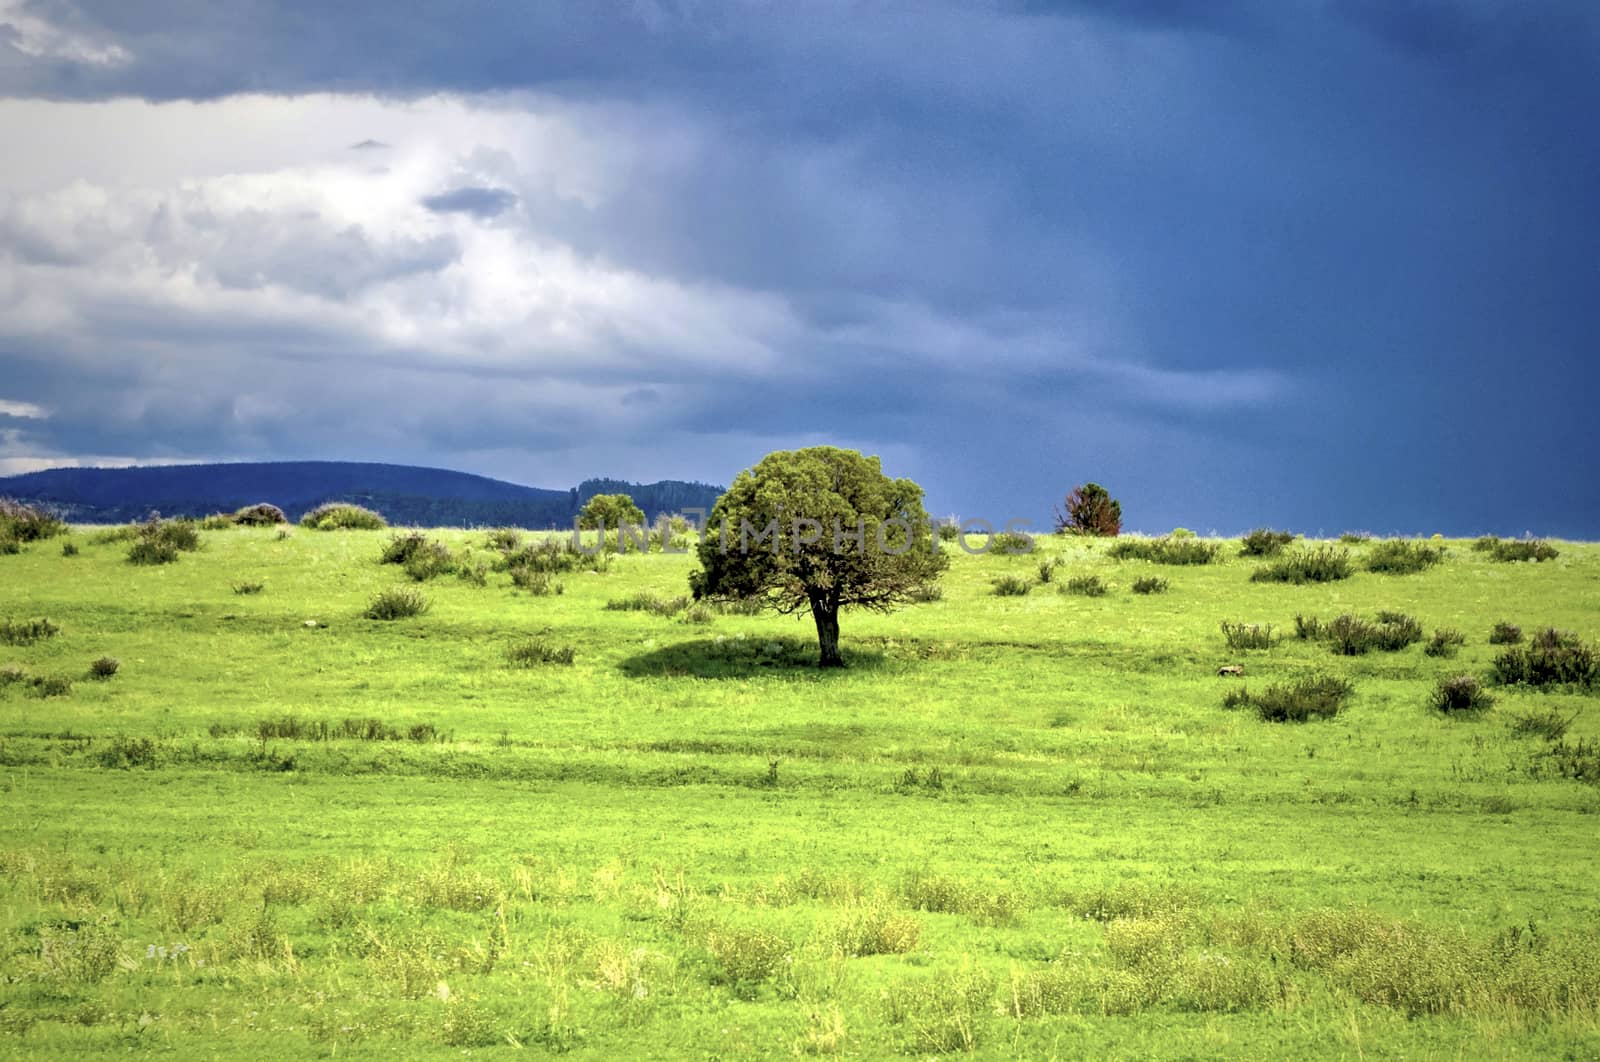 A lone tree in a green pasture under a stormy sky with mountains and green bushes.